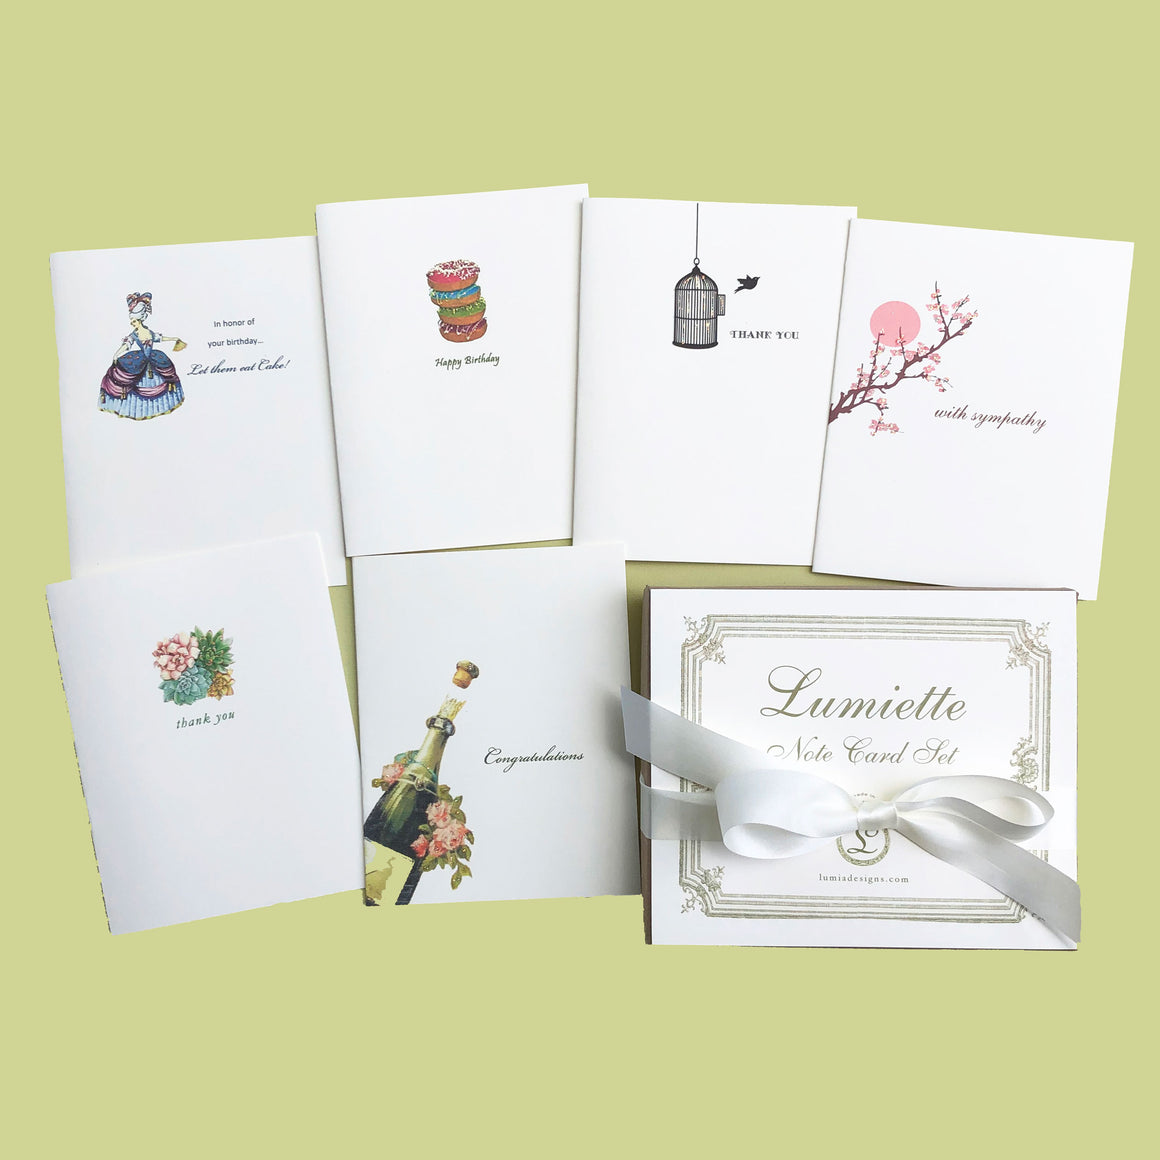 Lumia Designs Greeting Cards Boxed Set Assortment. Holiday Gift idea.